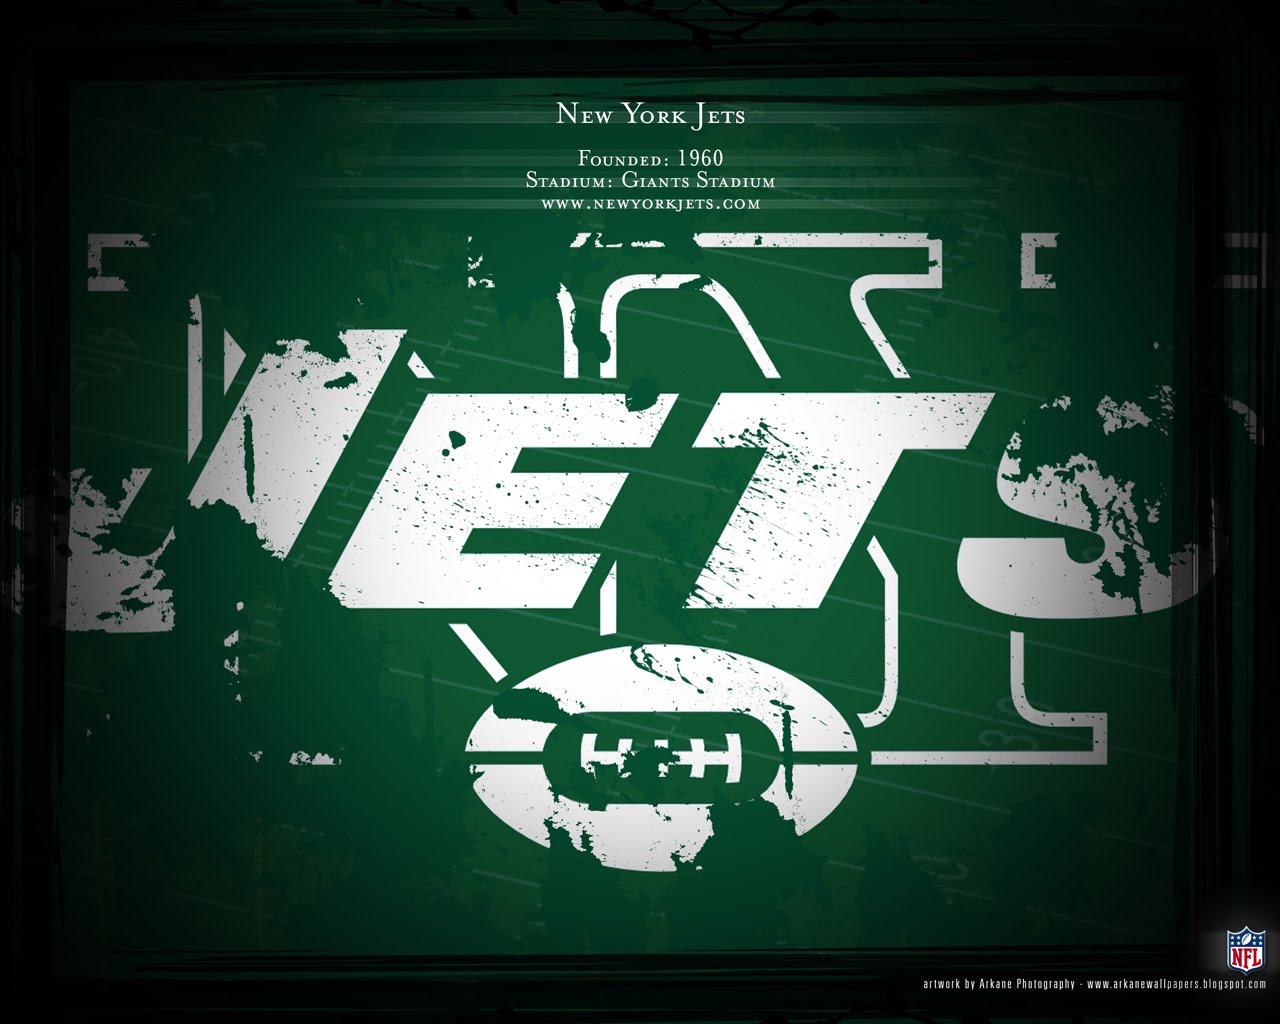 Guys Asked Us For More New York Jets Wallpaper So Here You Have